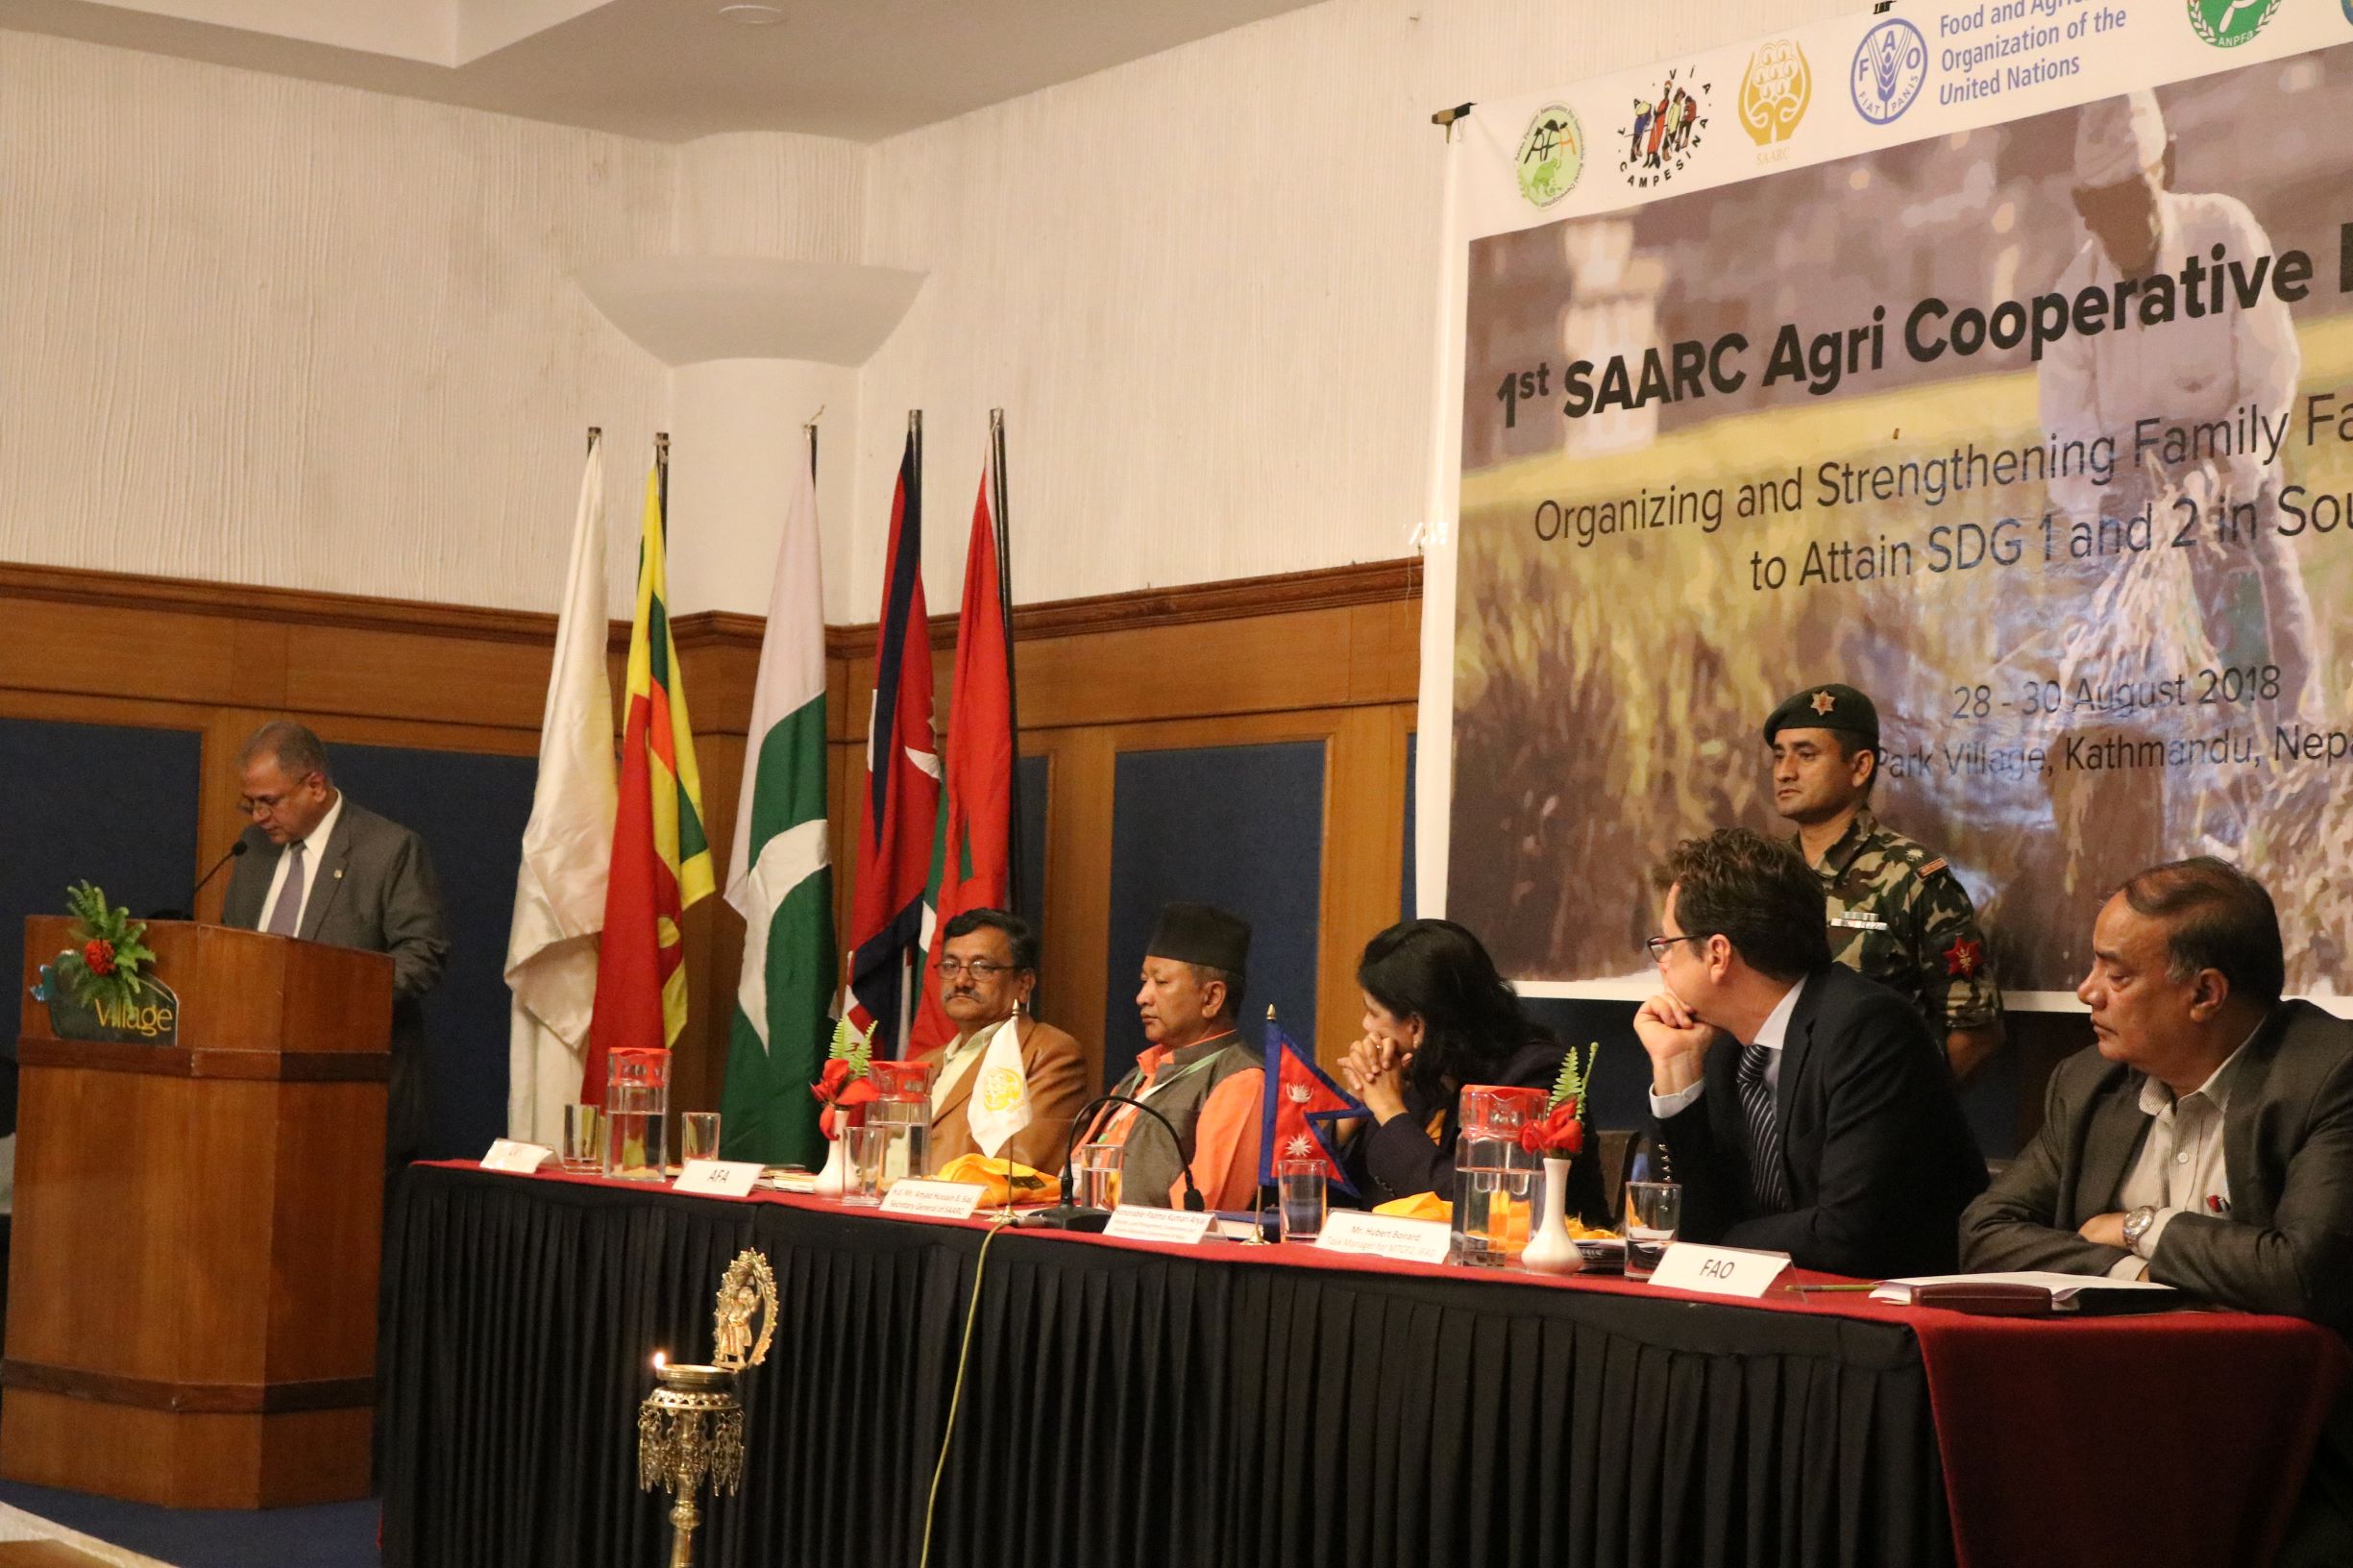 First SAARC Agri Cooperative Business Forum 